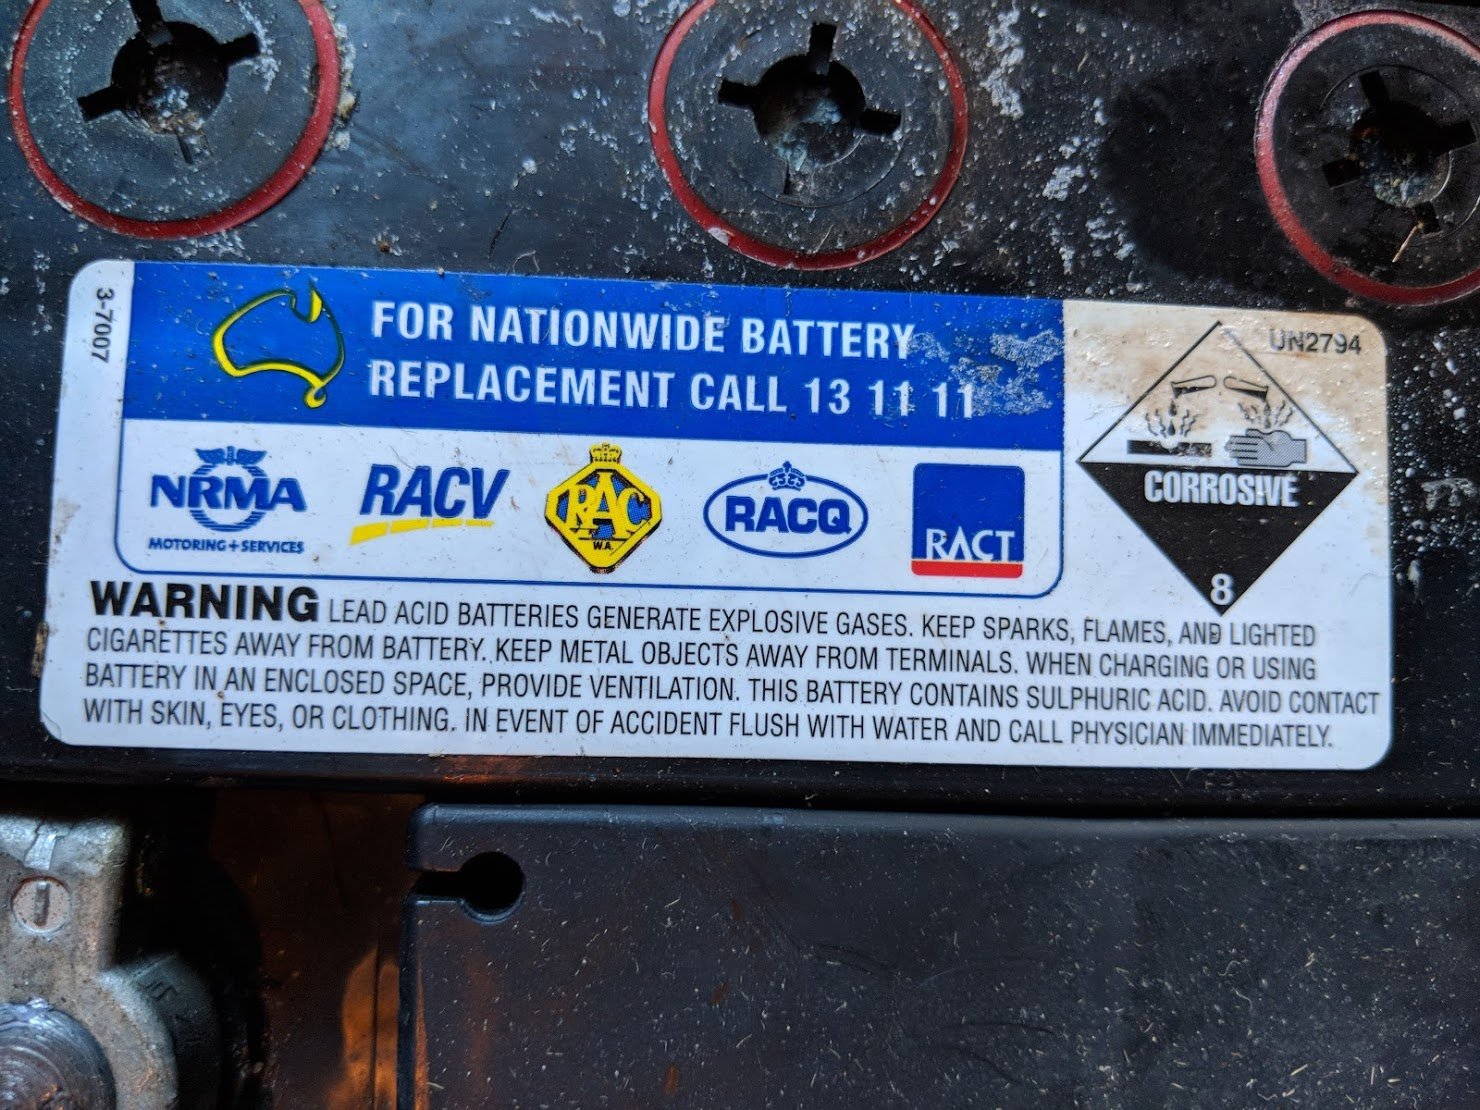 How To Tell How Old Your Battery Is The NRMA on Twitter: "Hey @mi1ez, it is a bit hard to tell if this is an  NRMA battery as the logo is listed on the side but all club batteries have